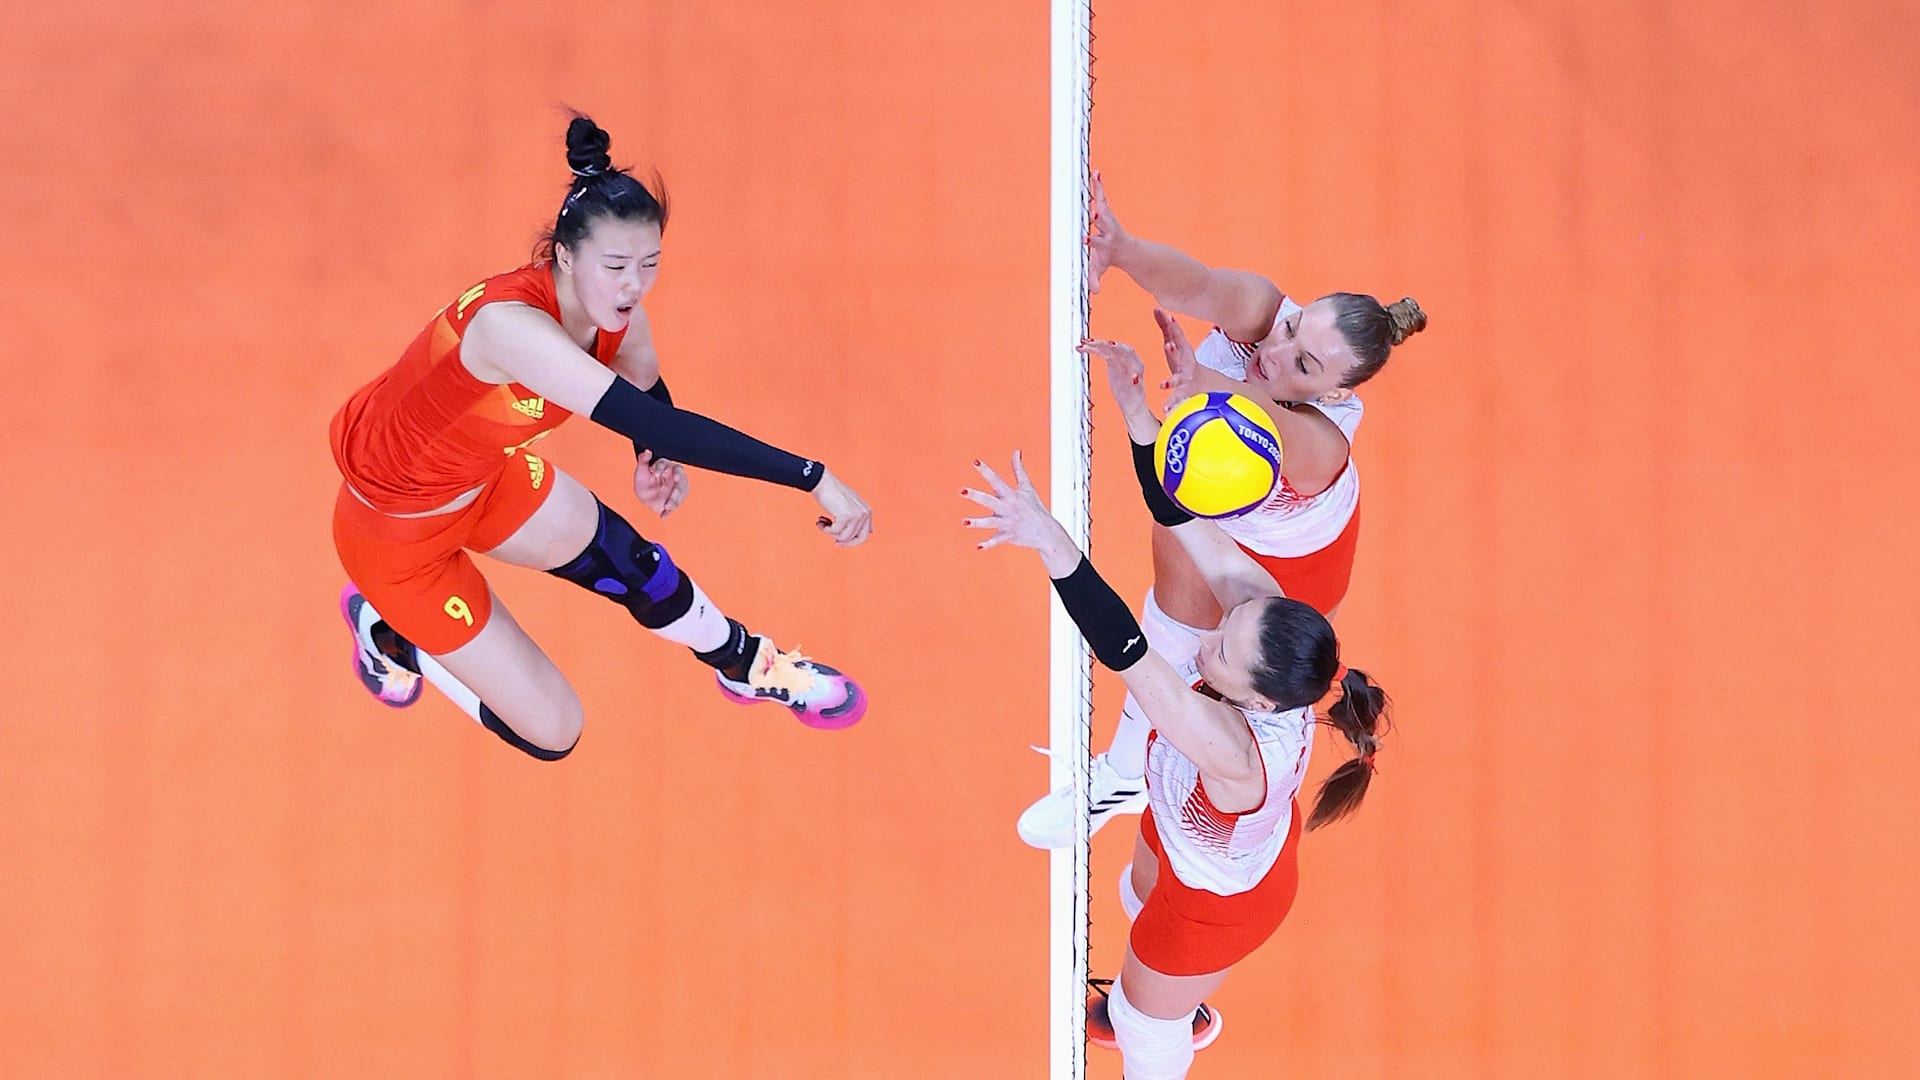 live streaming v league volleyball